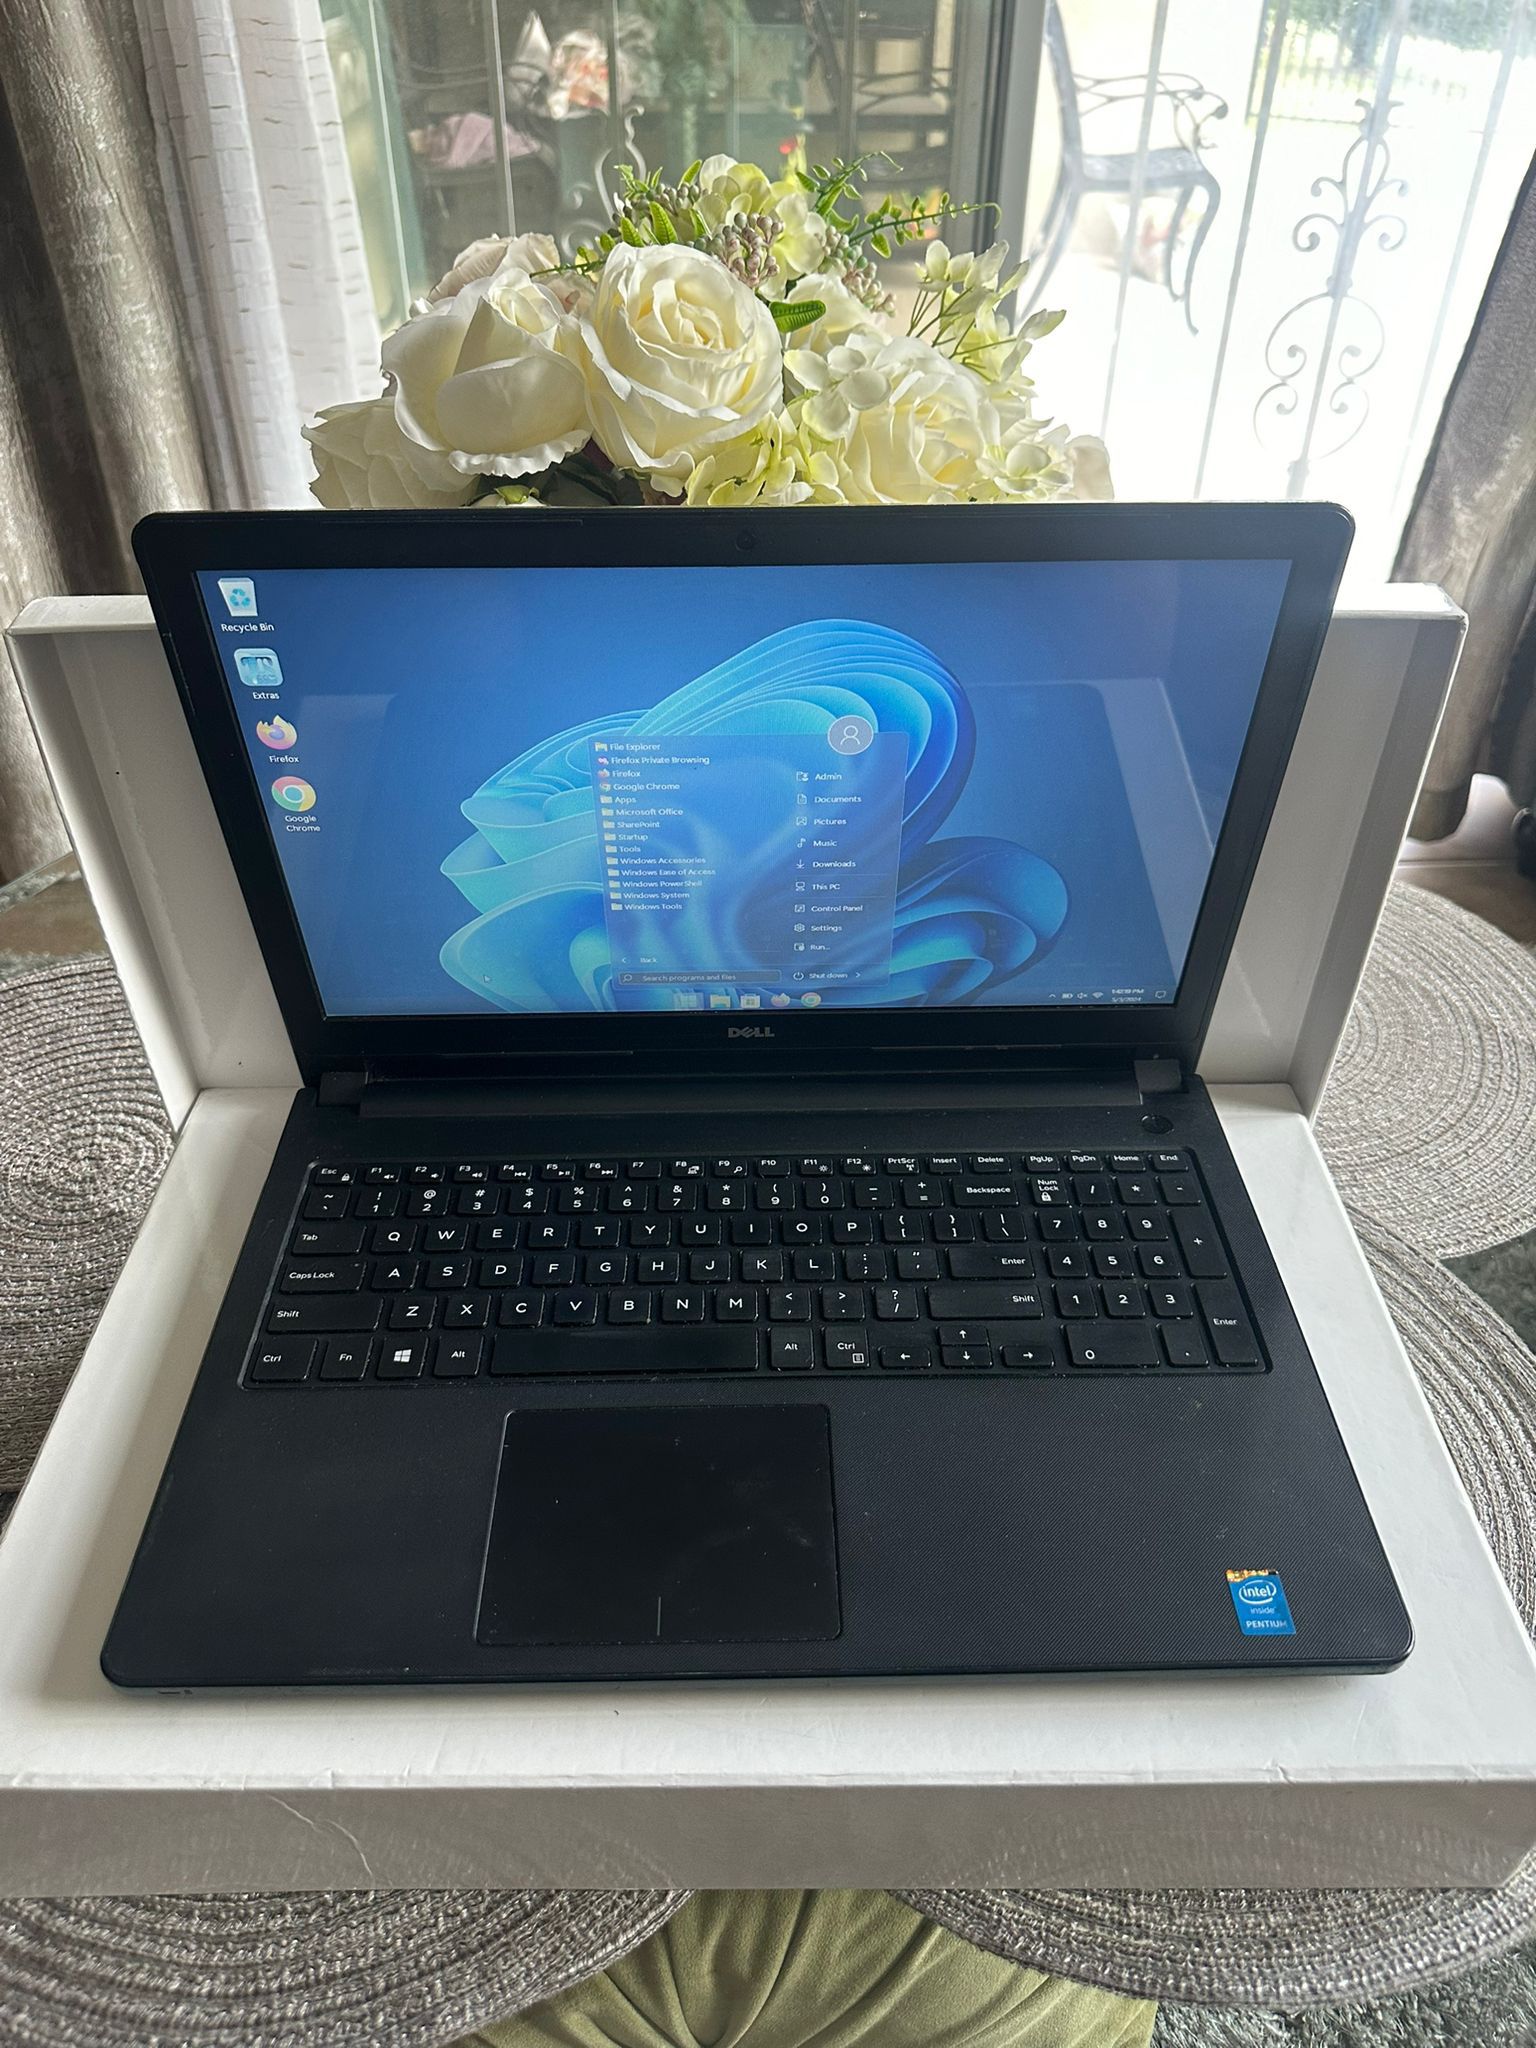 Dell Inspiron 15 Laptop 15.6” Inel Pentium 500GB HDD 4GB RAM Windows 11 and Office - $99